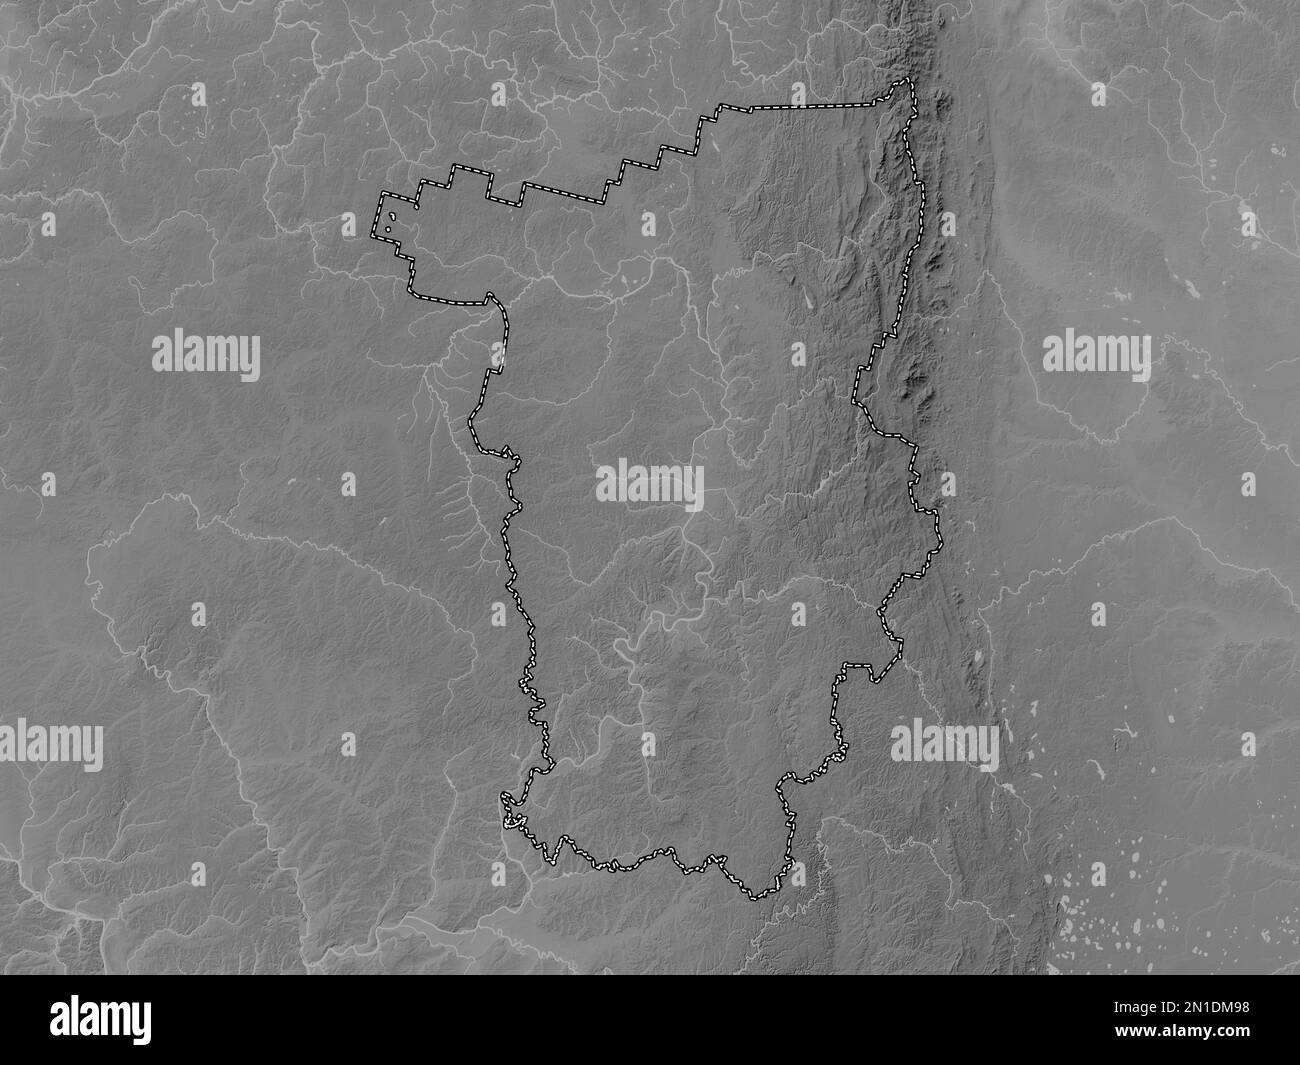 Perm', territory of Russia. Grayscale elevation map with lakes and rivers Stock Photo